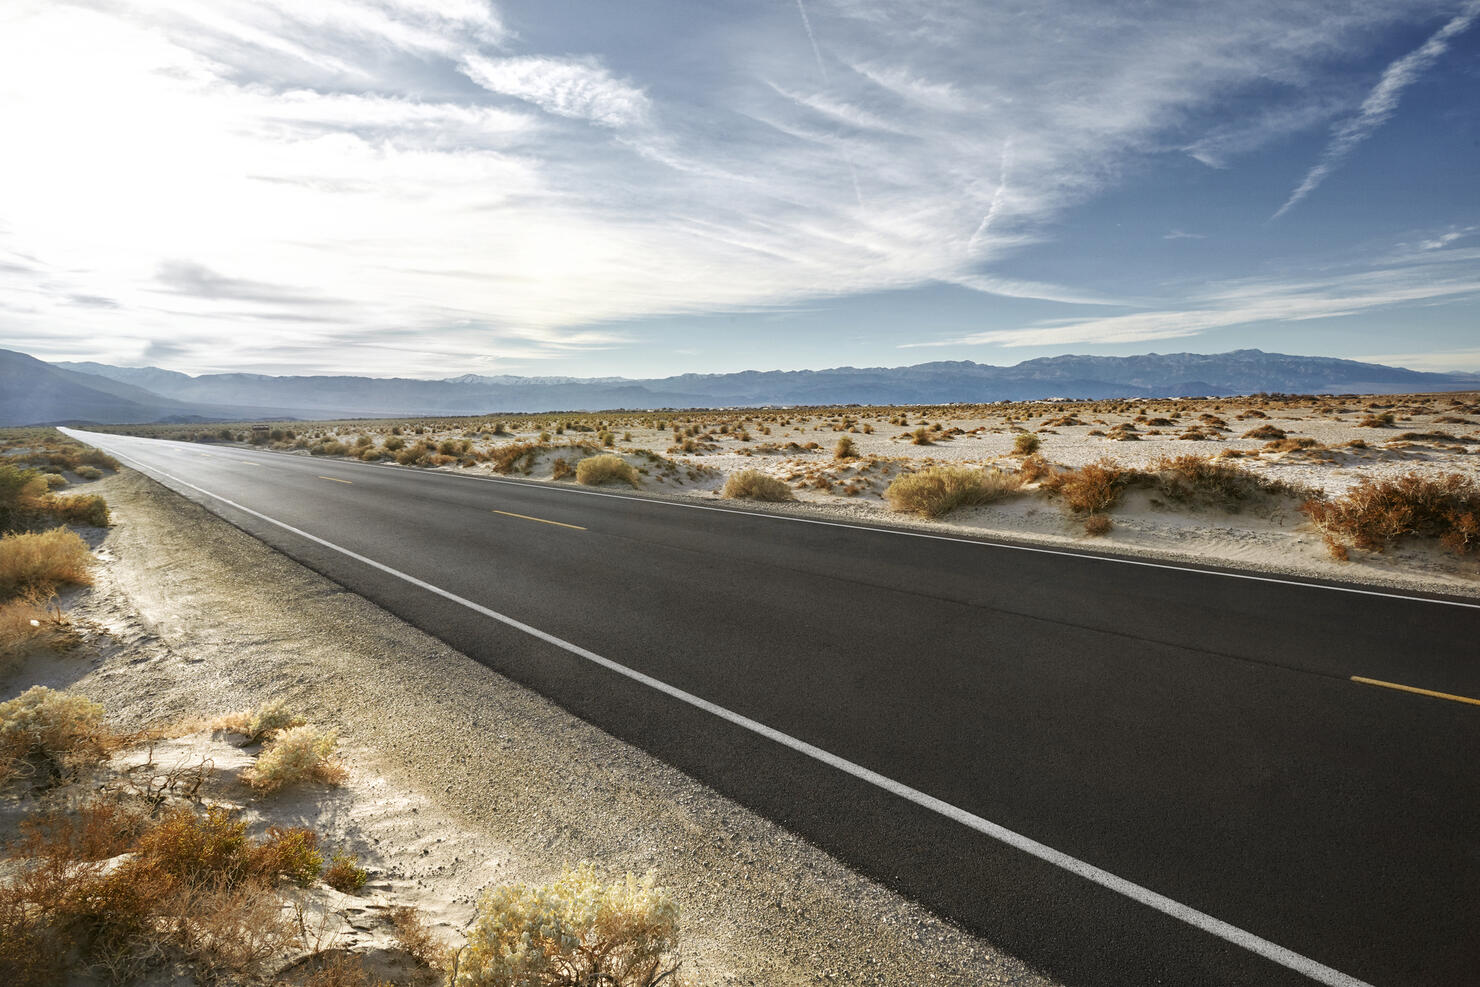 Empty road in desert landscape with distant mountains